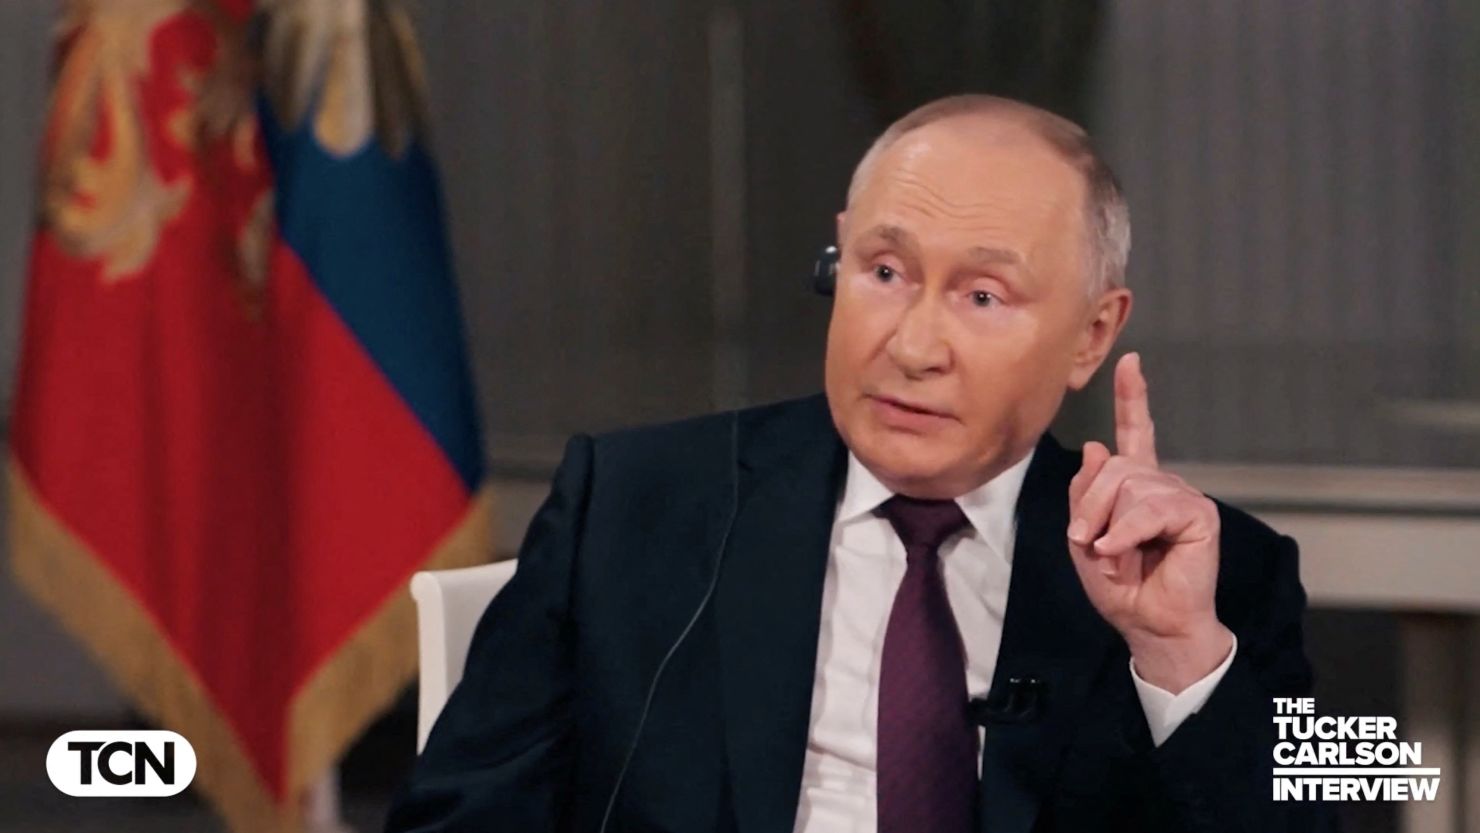 Russian President Vladimir Putin speaks during an interview with US television host Tucker Carlson in Moscow, Russia, on February 6, 2024, in this still image taken from video released on February 8